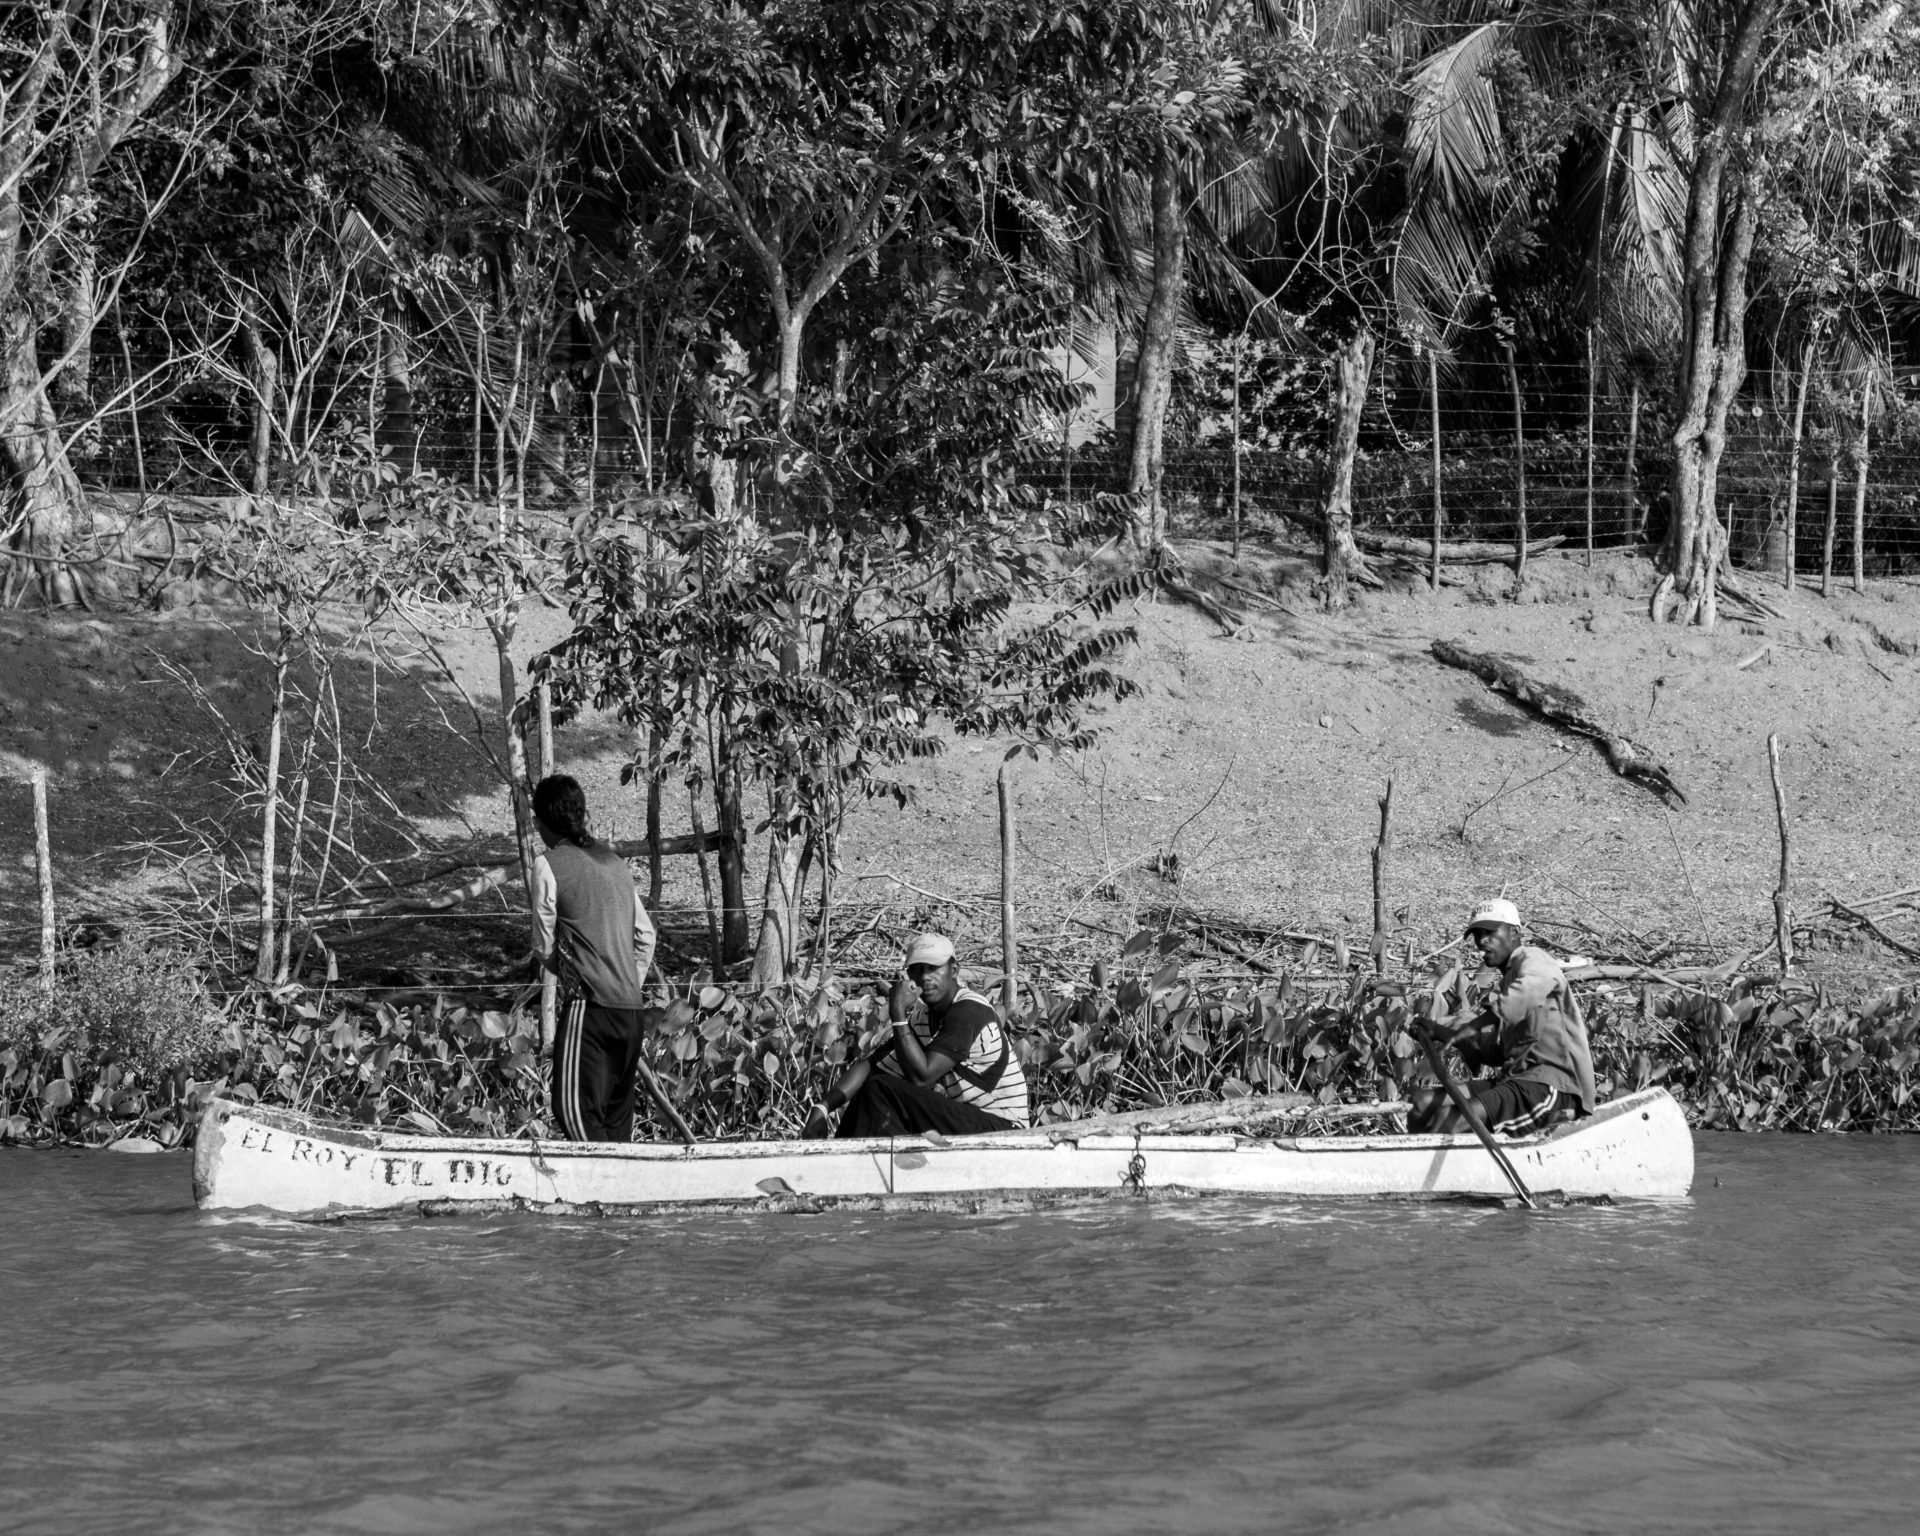 Men on a canoe fishing off of the waters of Pirate Island.